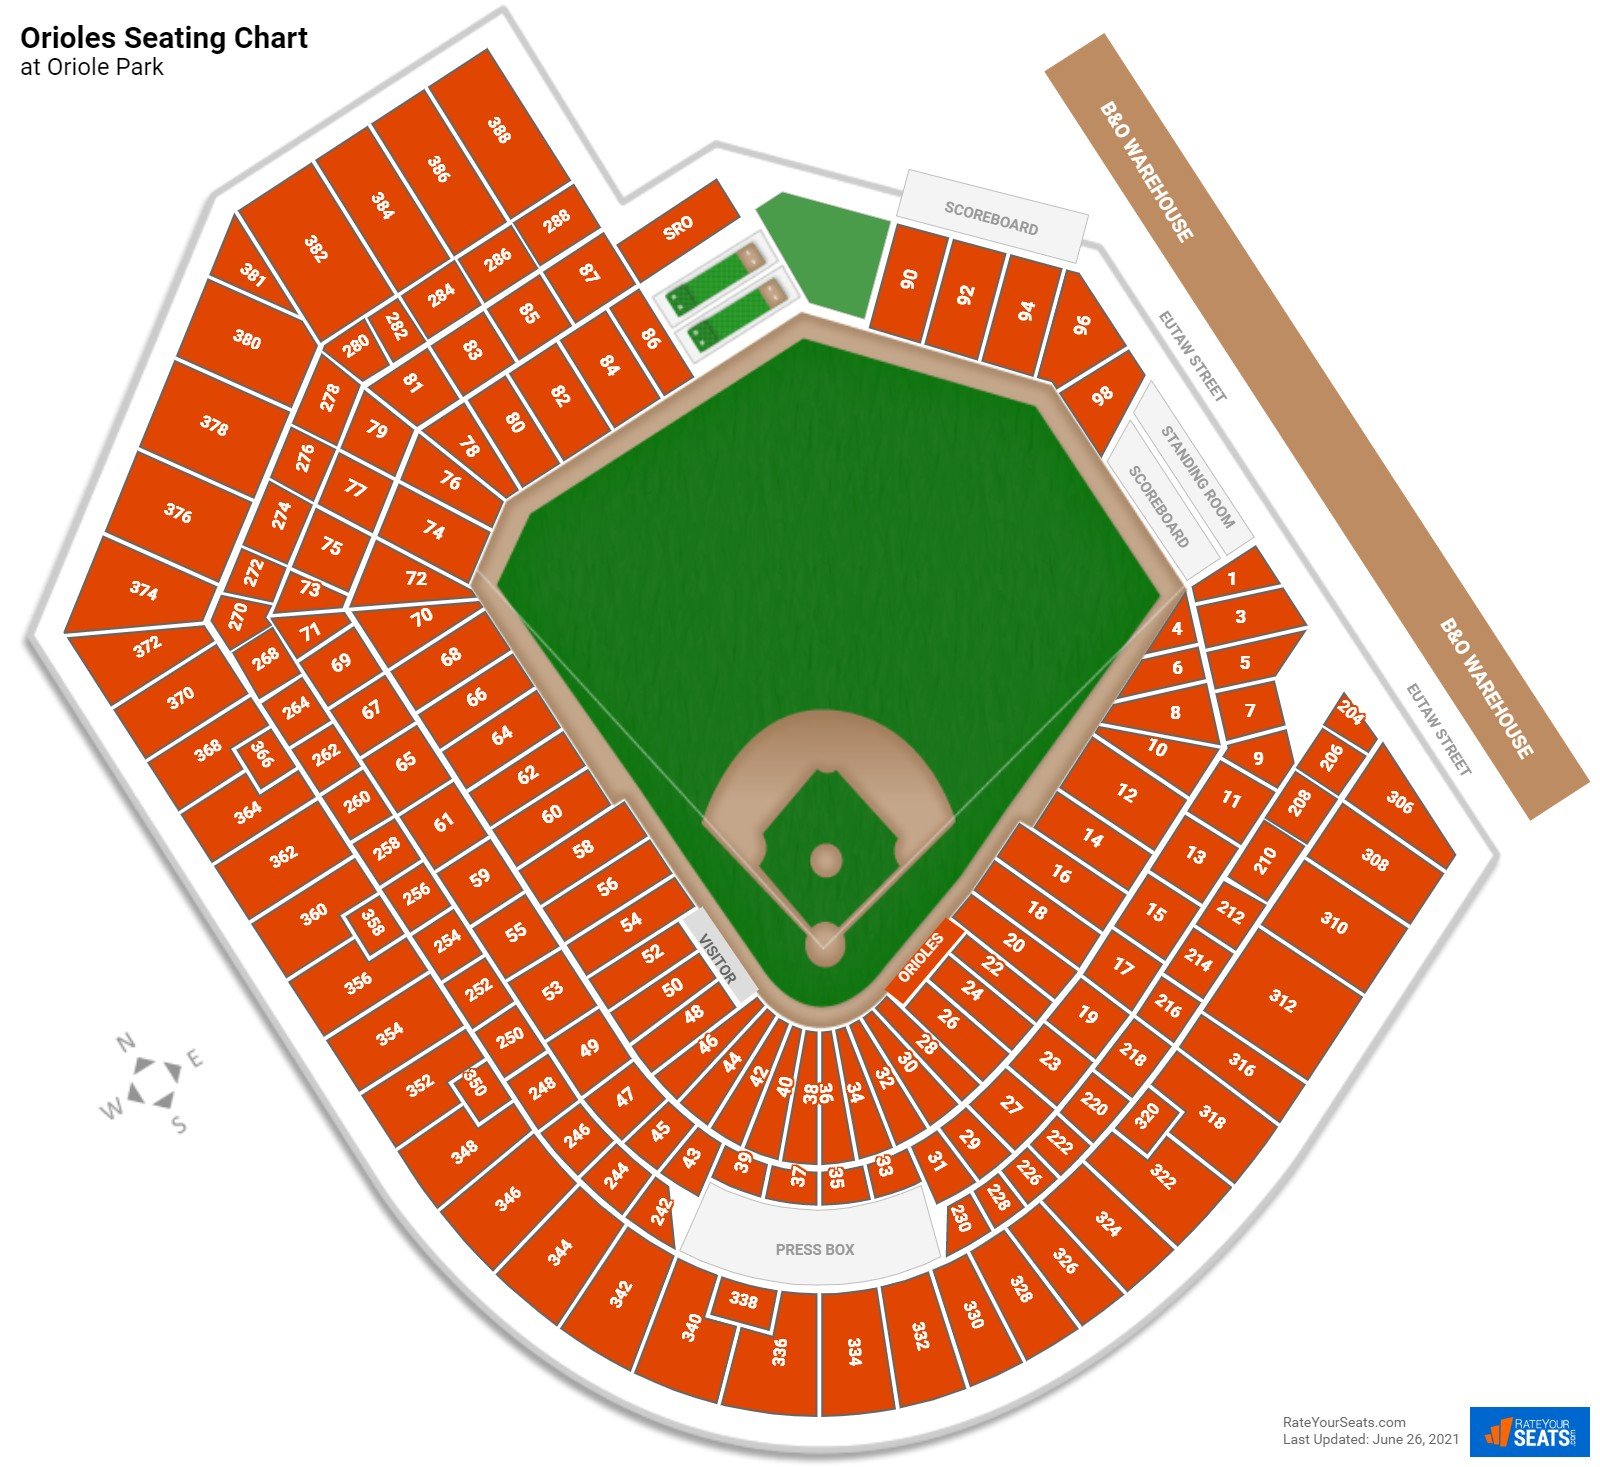 Baltimore Orioles Seating Chart at Oriole Park